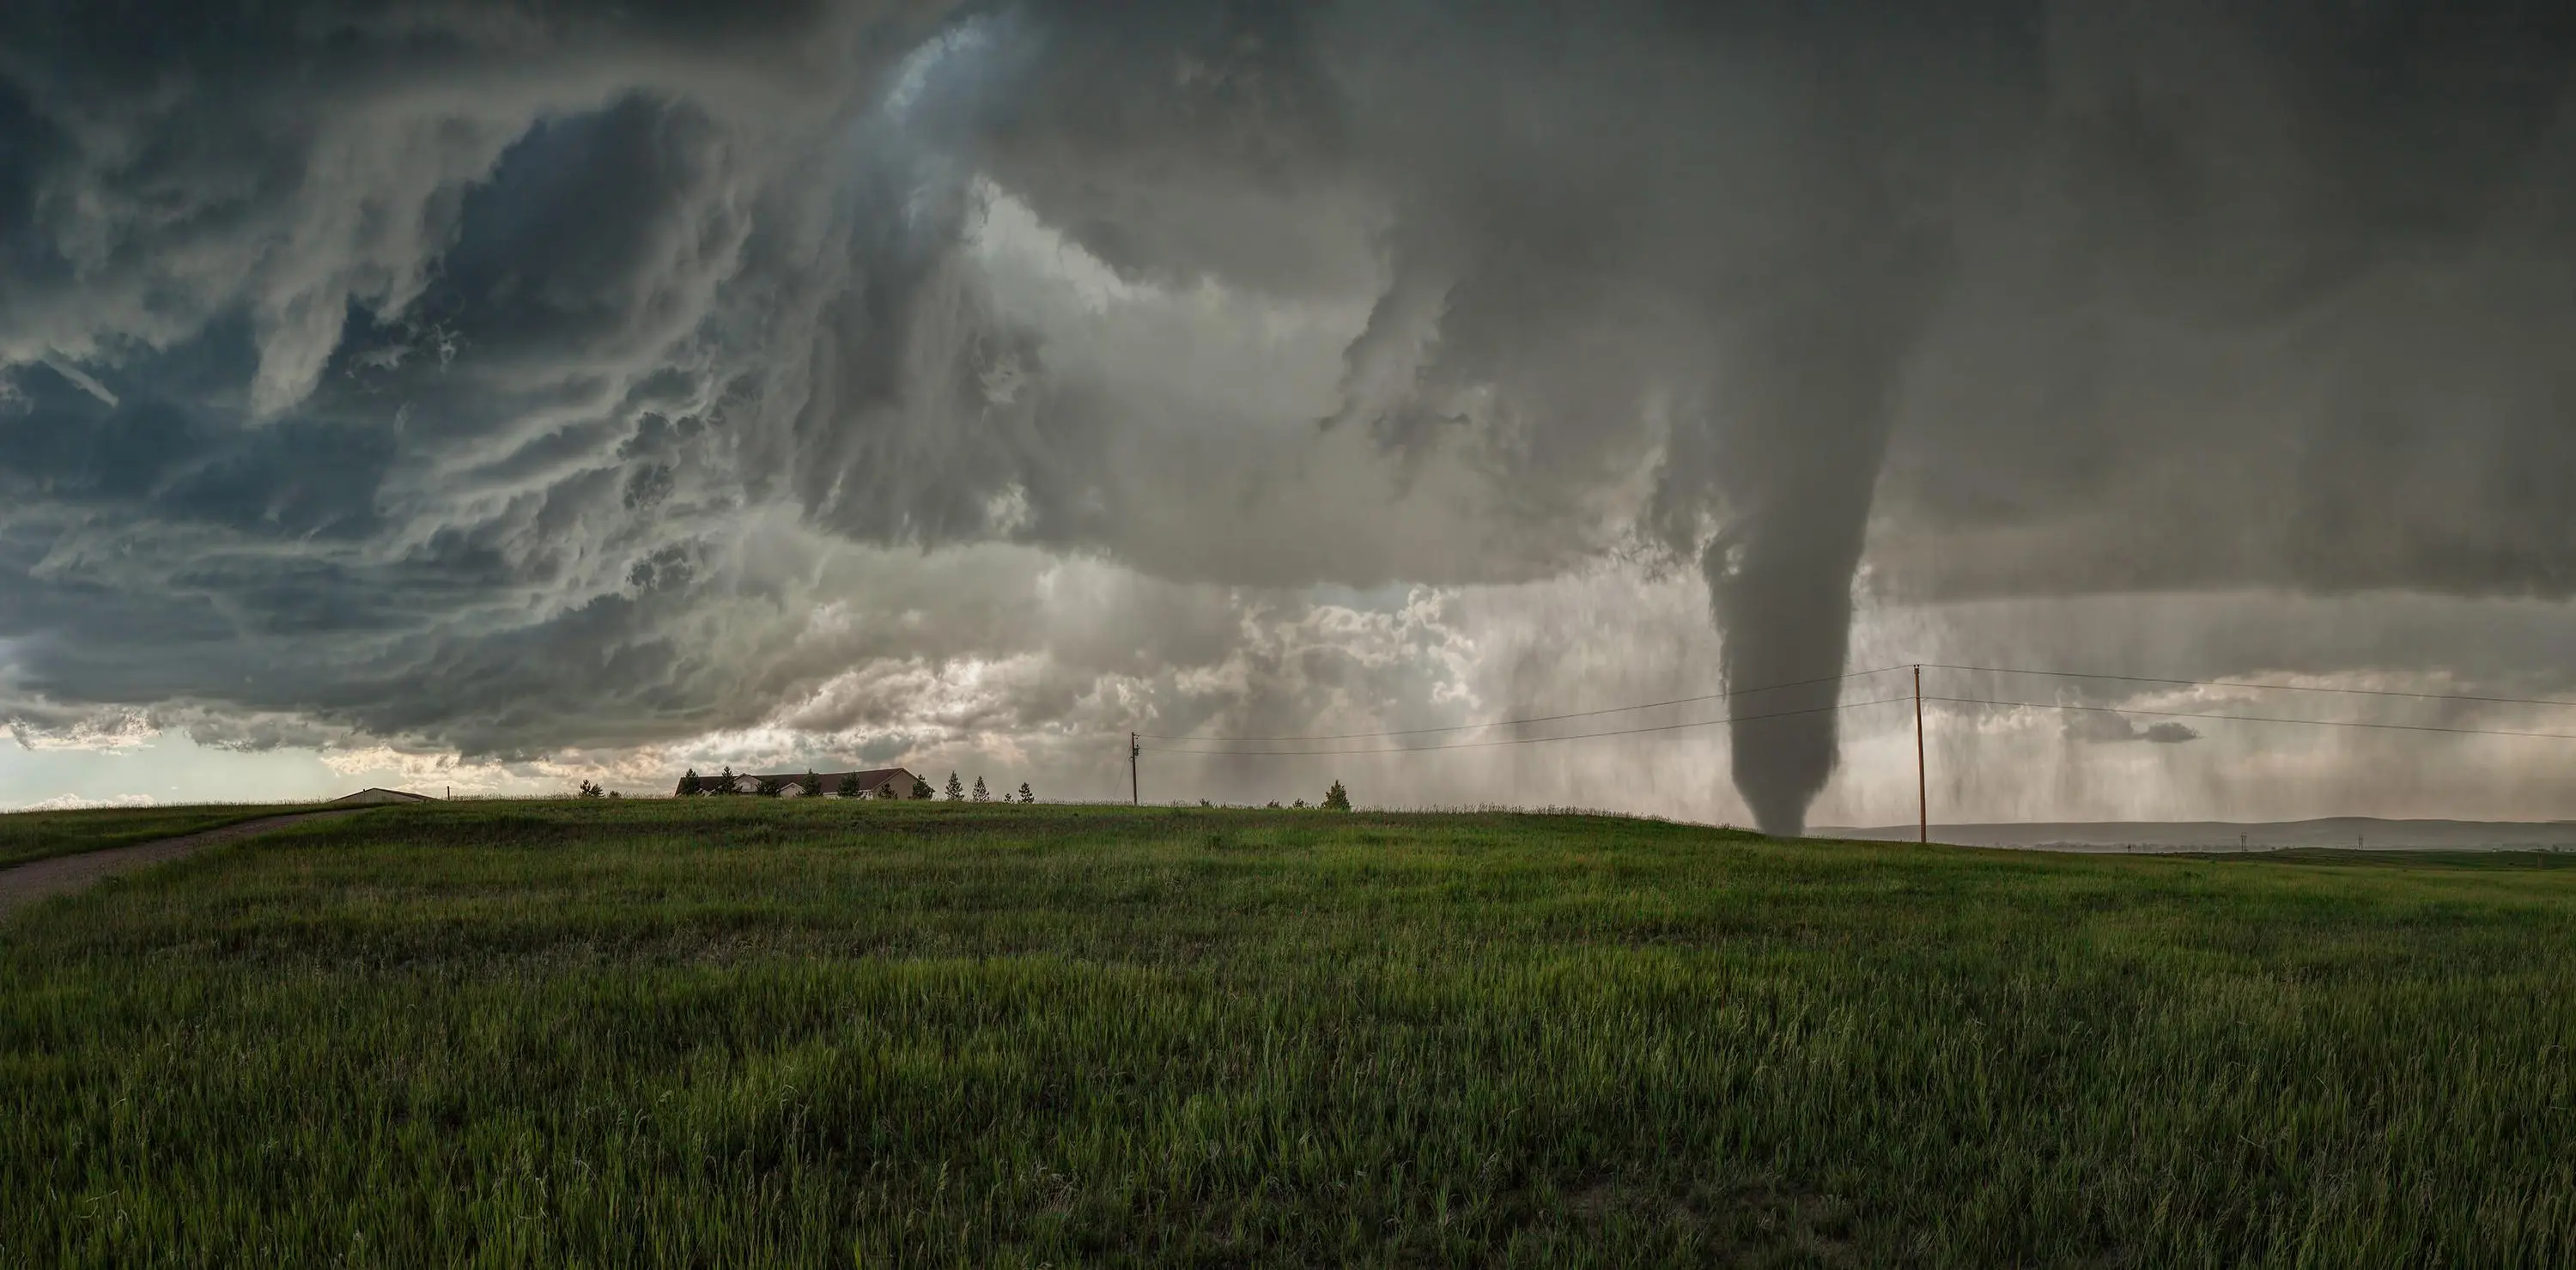 3000x1479 Jaw-dropping pics of tornadoes, lightning bolts and violent storms captured by daredevil photographer who dices with death to get close to the action | The Su